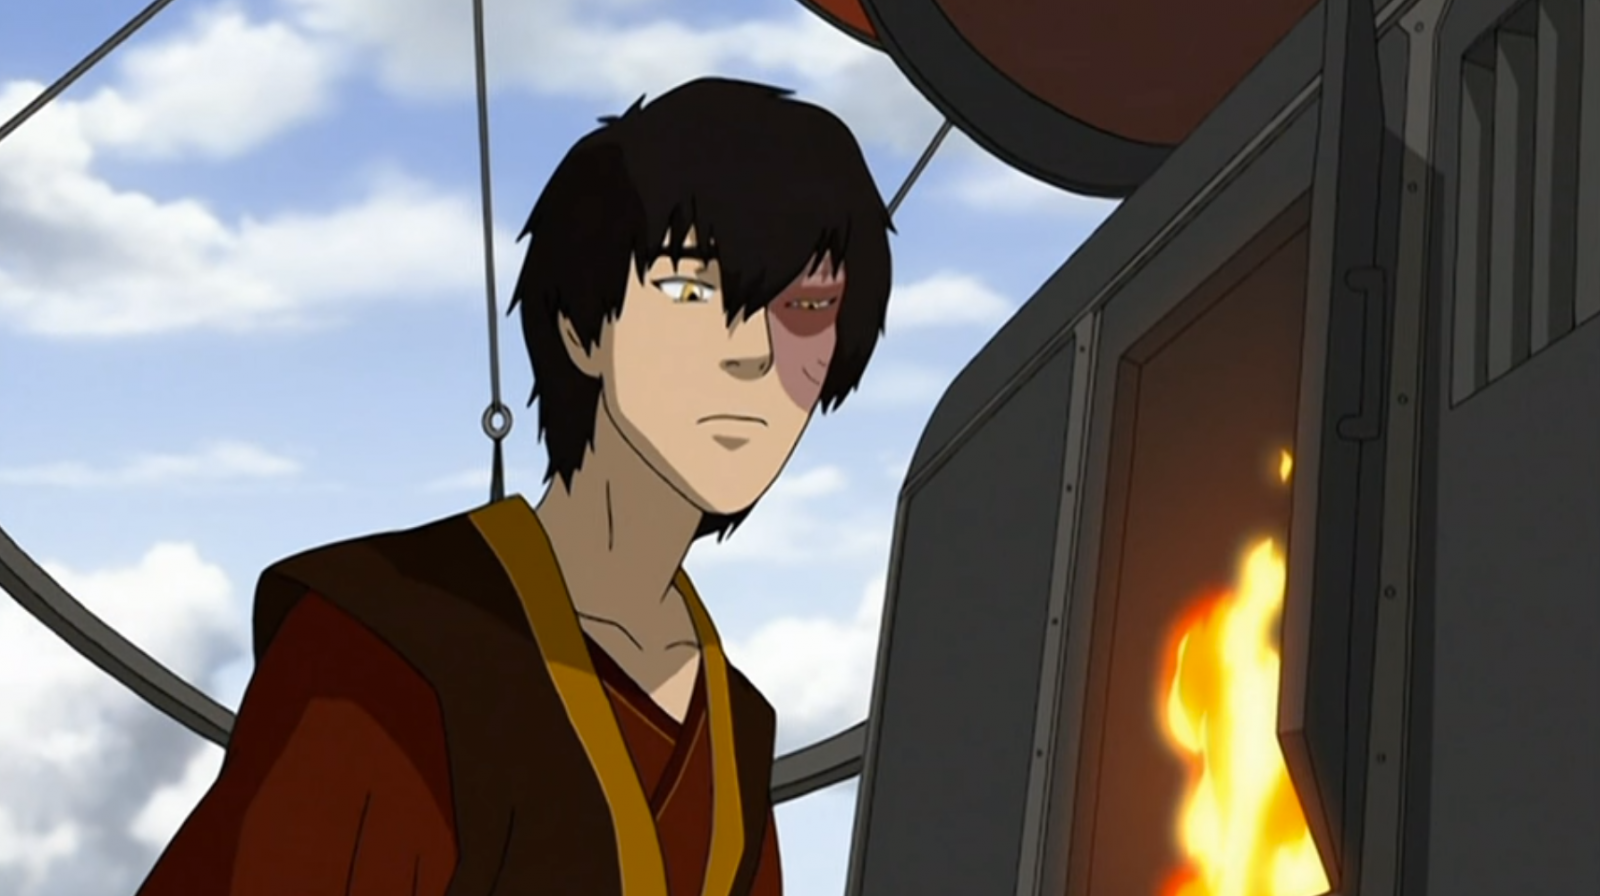 Avatar The Last Airbender  The Promise Zuko Avatar The Last Airbender  The Promise Part 1 Katara Avatar The Last Airbender  The Search prince  zuko transparent background PNG clipart  HiClipart